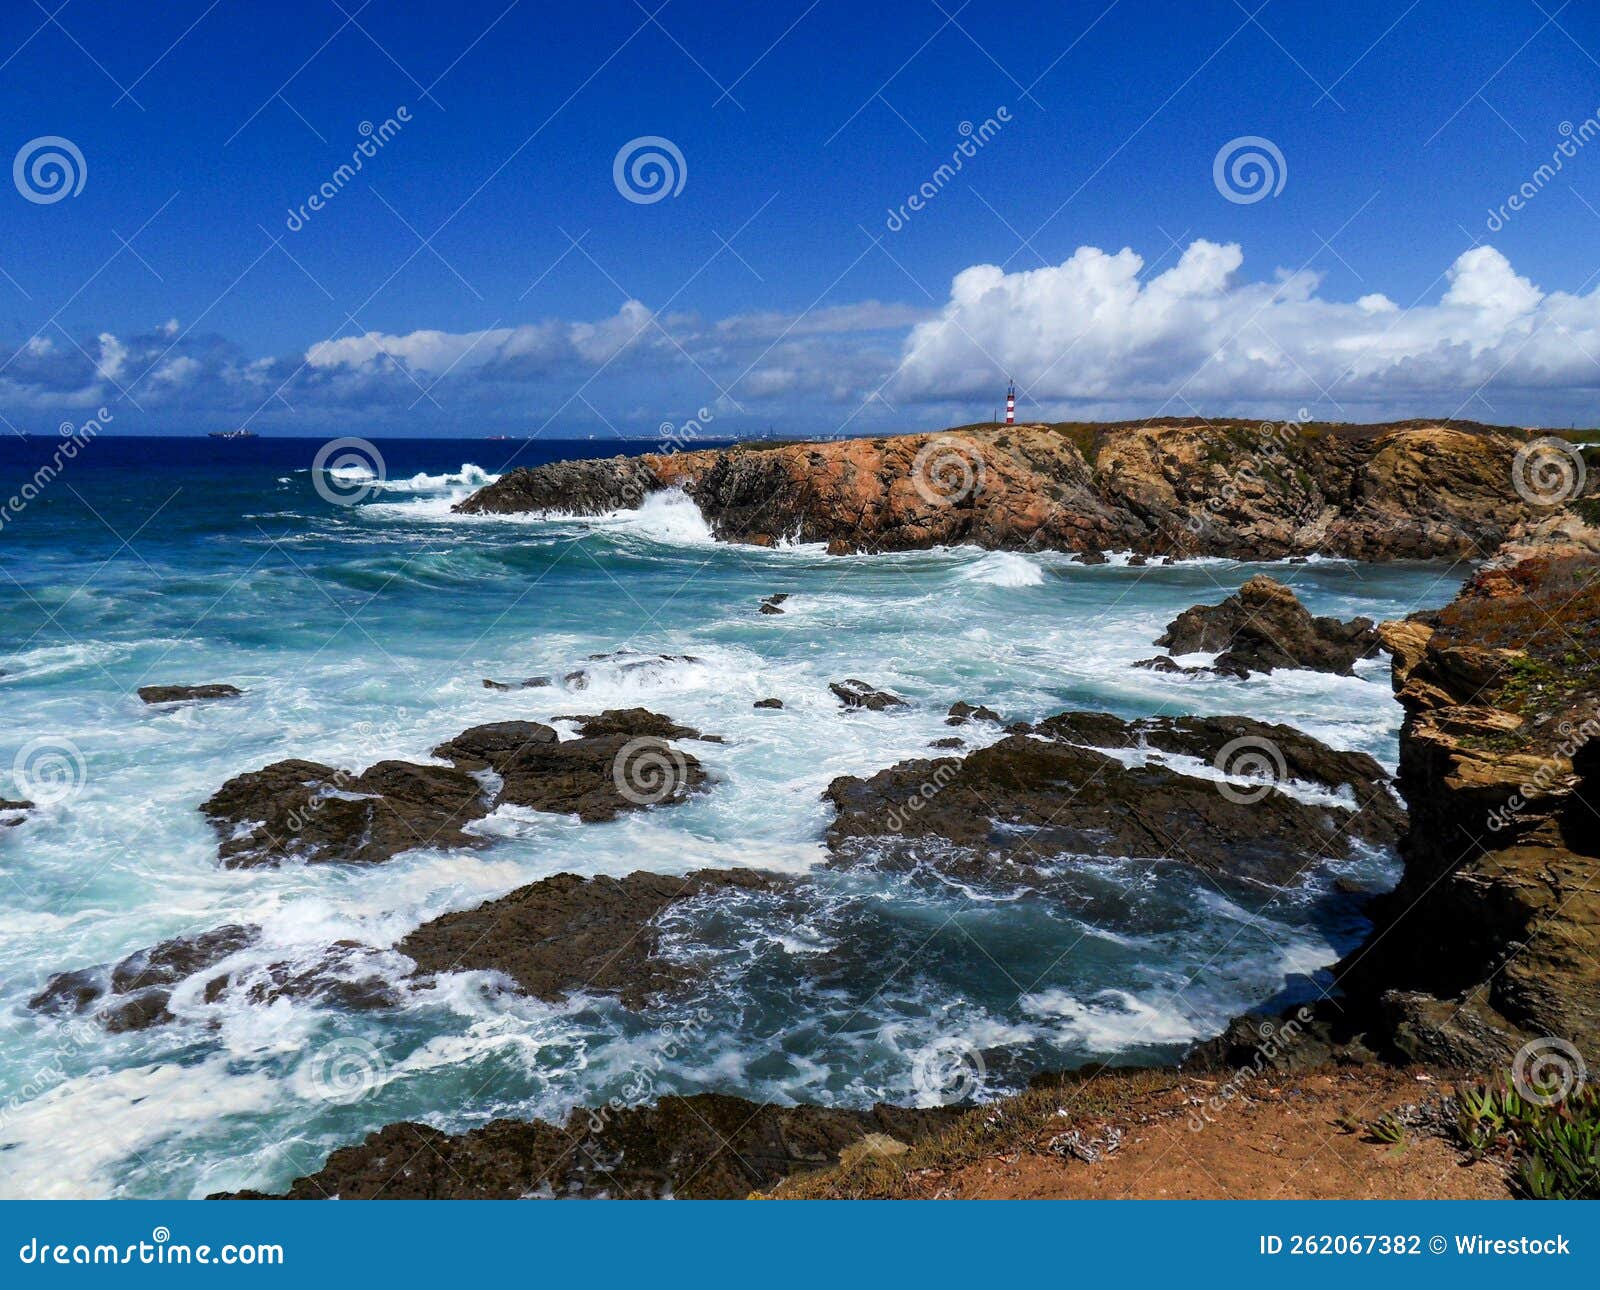 natural view of the rocky coast of alentejo litoral in portugal